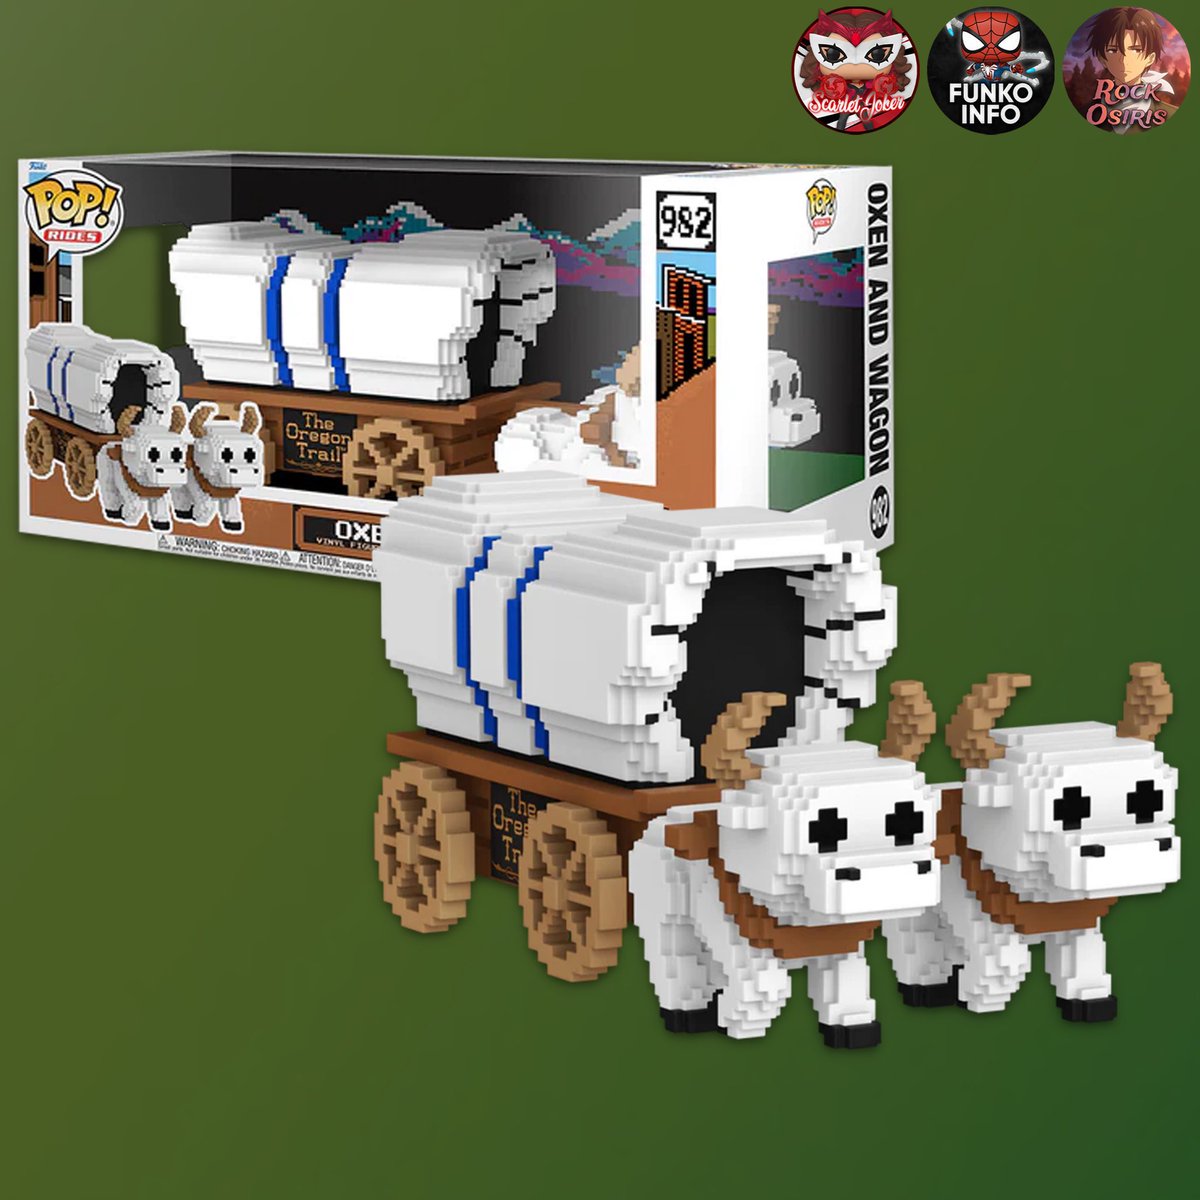 First look at the new Oregon Trail Deluxe Funko POP! Ride! Dropping at the links below this week ~ thanks @funkoinfo_ ~
EE ~ fnkpp.com/Drop
Amzn ~ fnkpp.com/Amzn
#Ad #OregonTrail #FPN #FunkoPOPNews #Funko #POP #POPVinyl #FunkoPOP #FunkoSoda